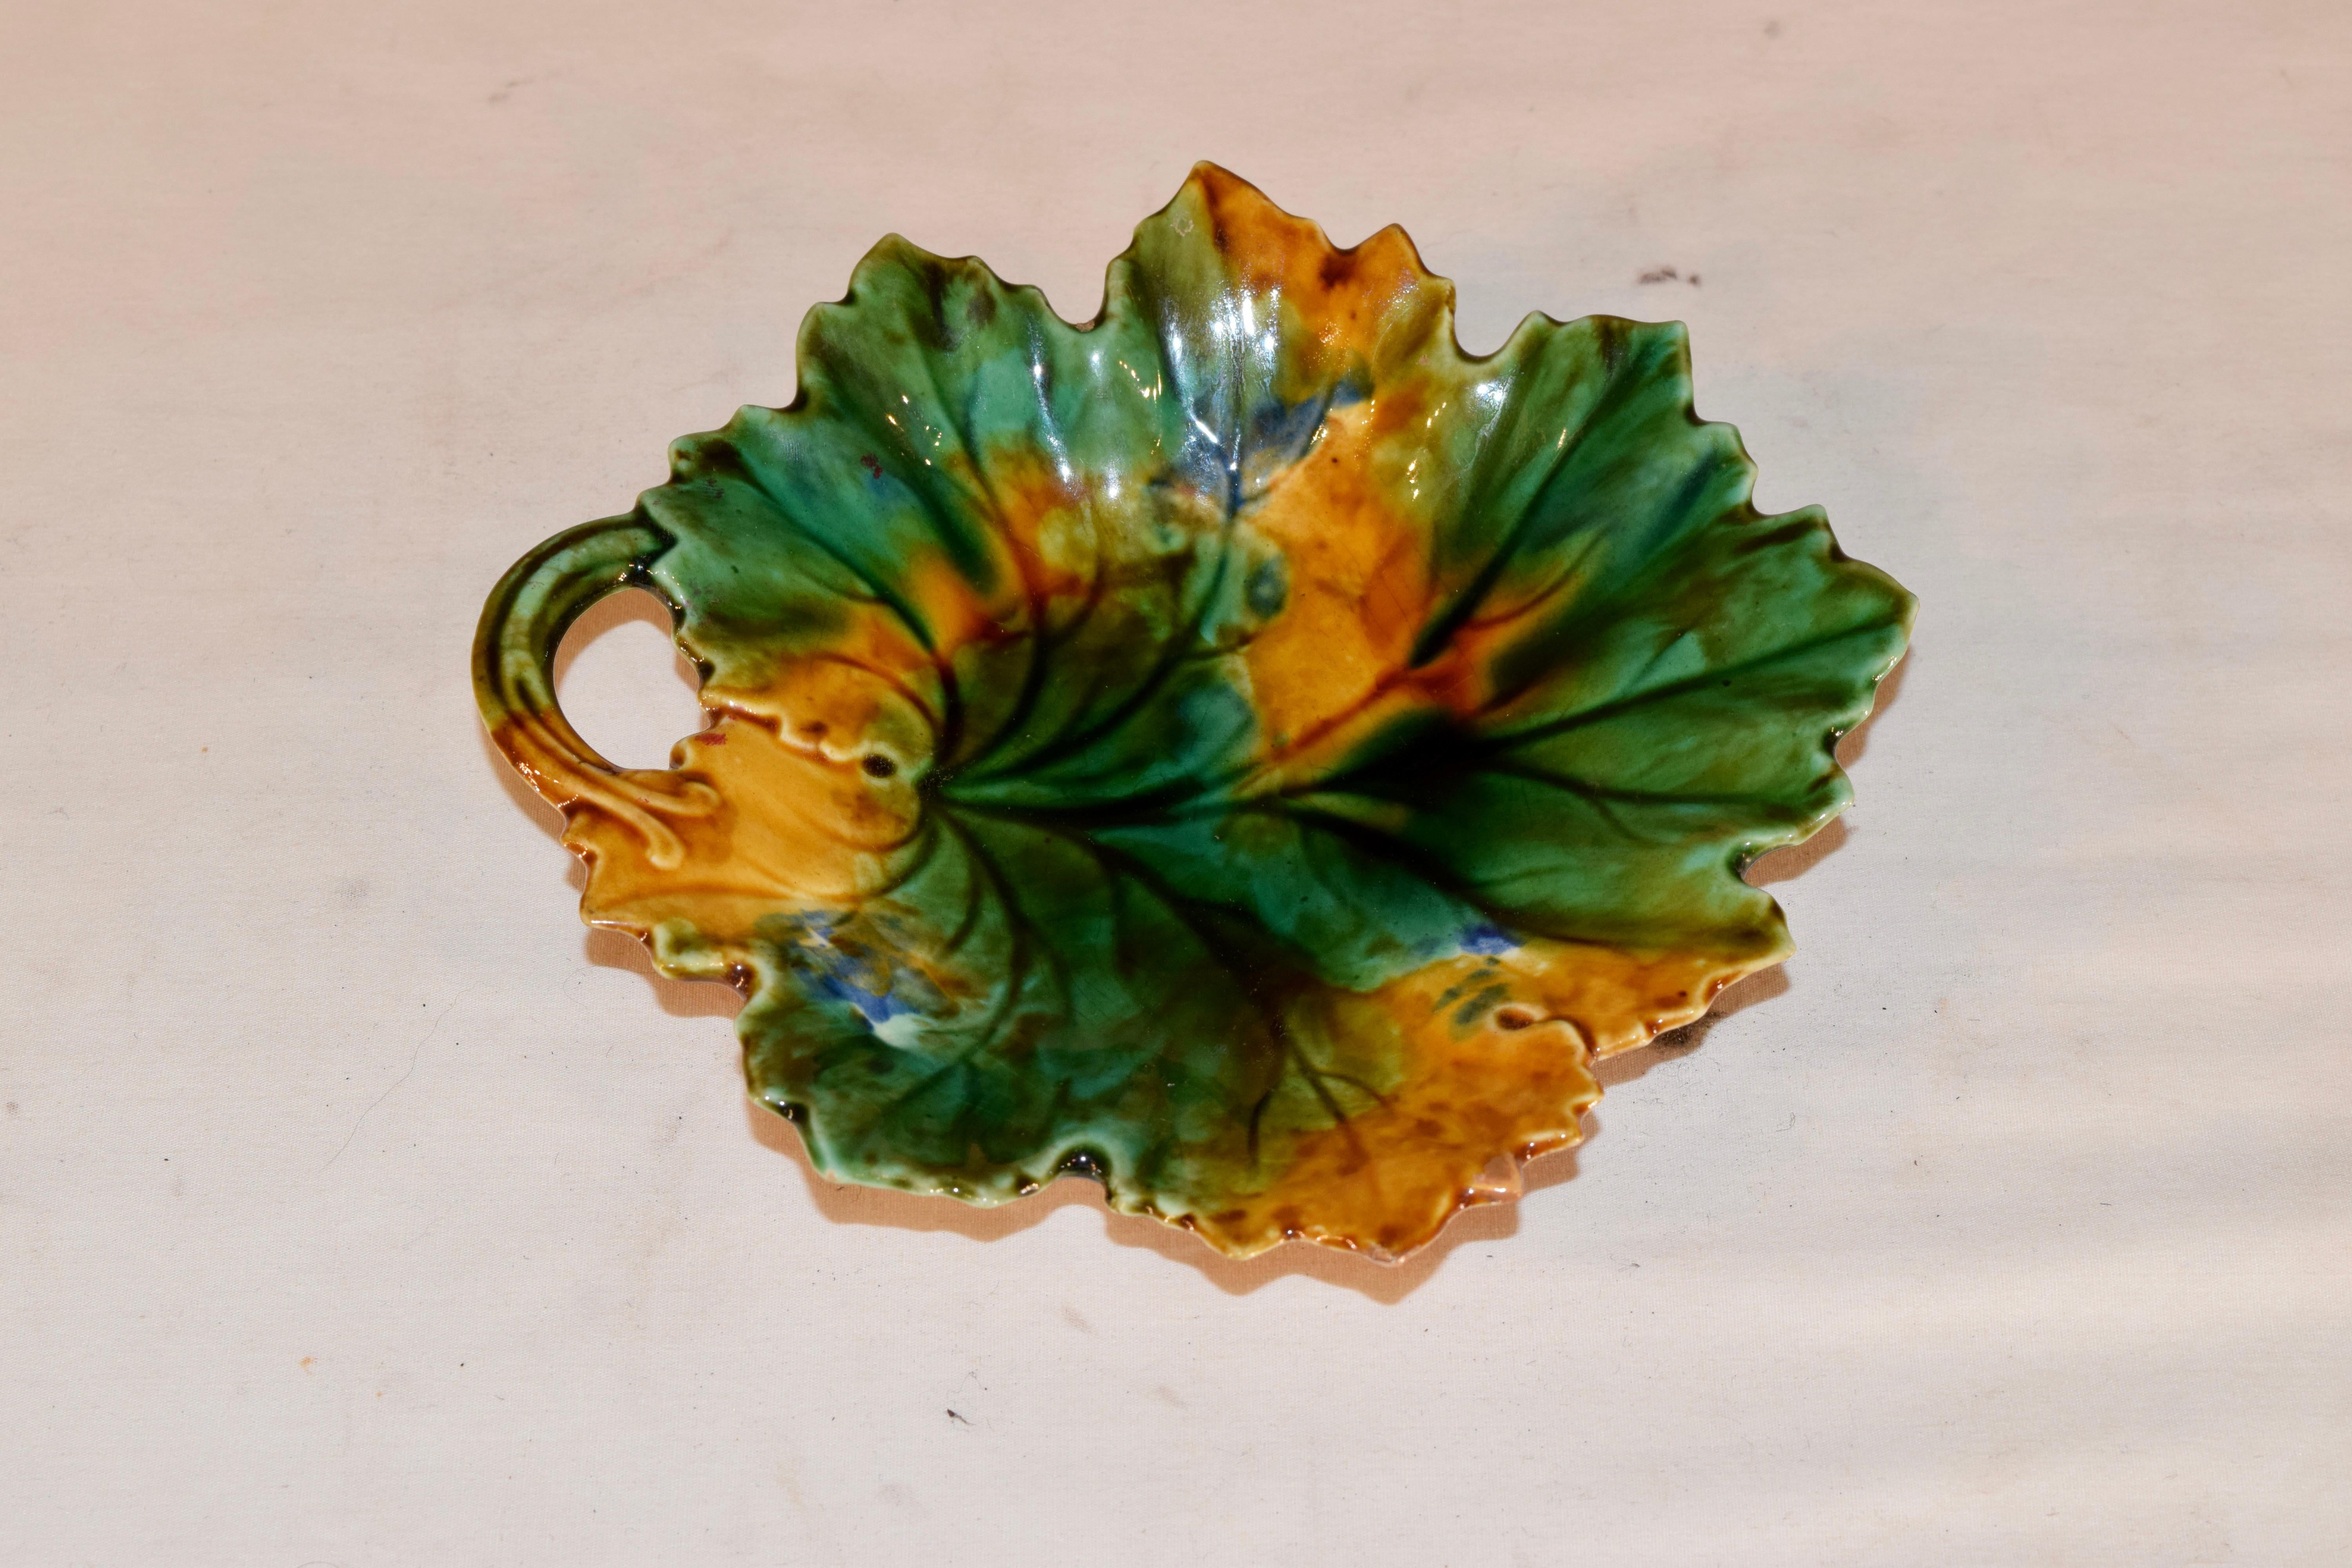 Late 19th century majolica leaf dish with lovely mottled coloring and a wonderful shape. Marked CH A Luxembourg on bottom.